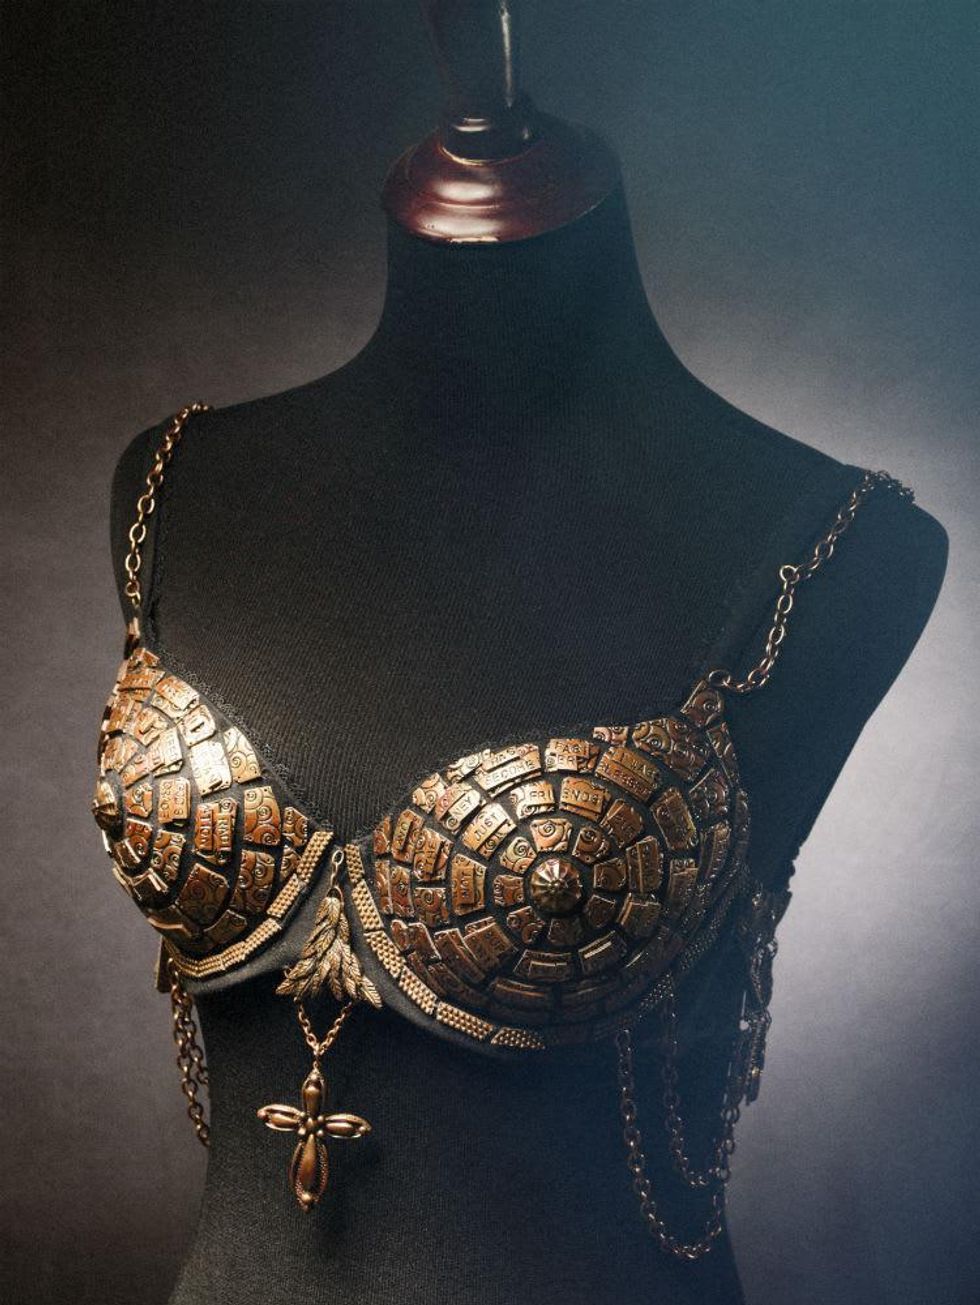 Check out these amazing art bras that are supporting Austin women